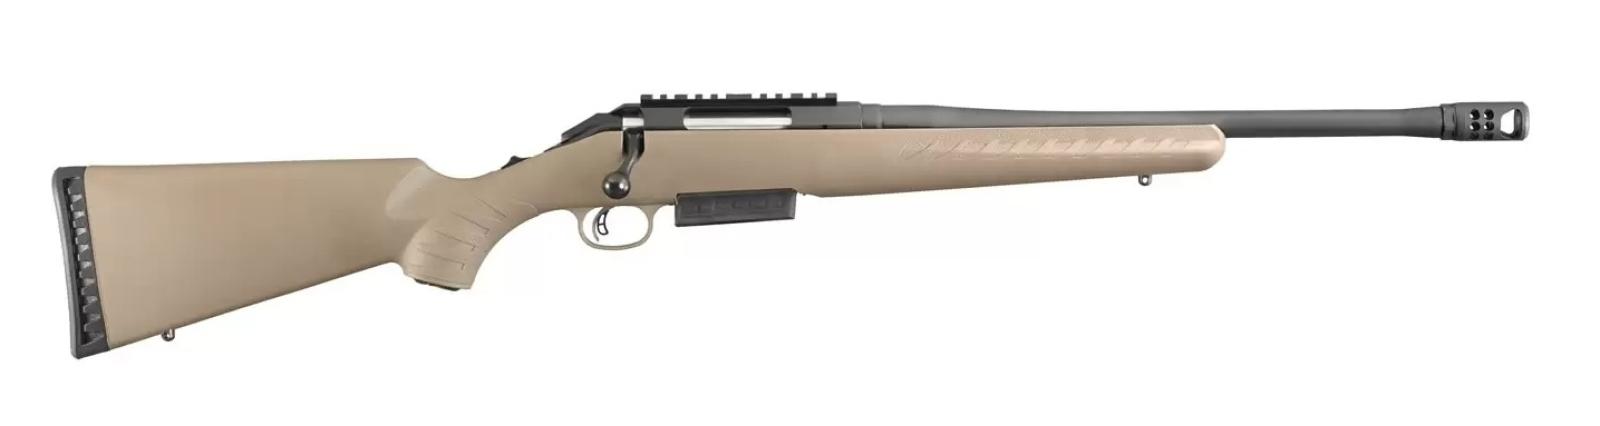 Ruger American Rifle Ranch 5.56 NATO Bolt Action Rifle